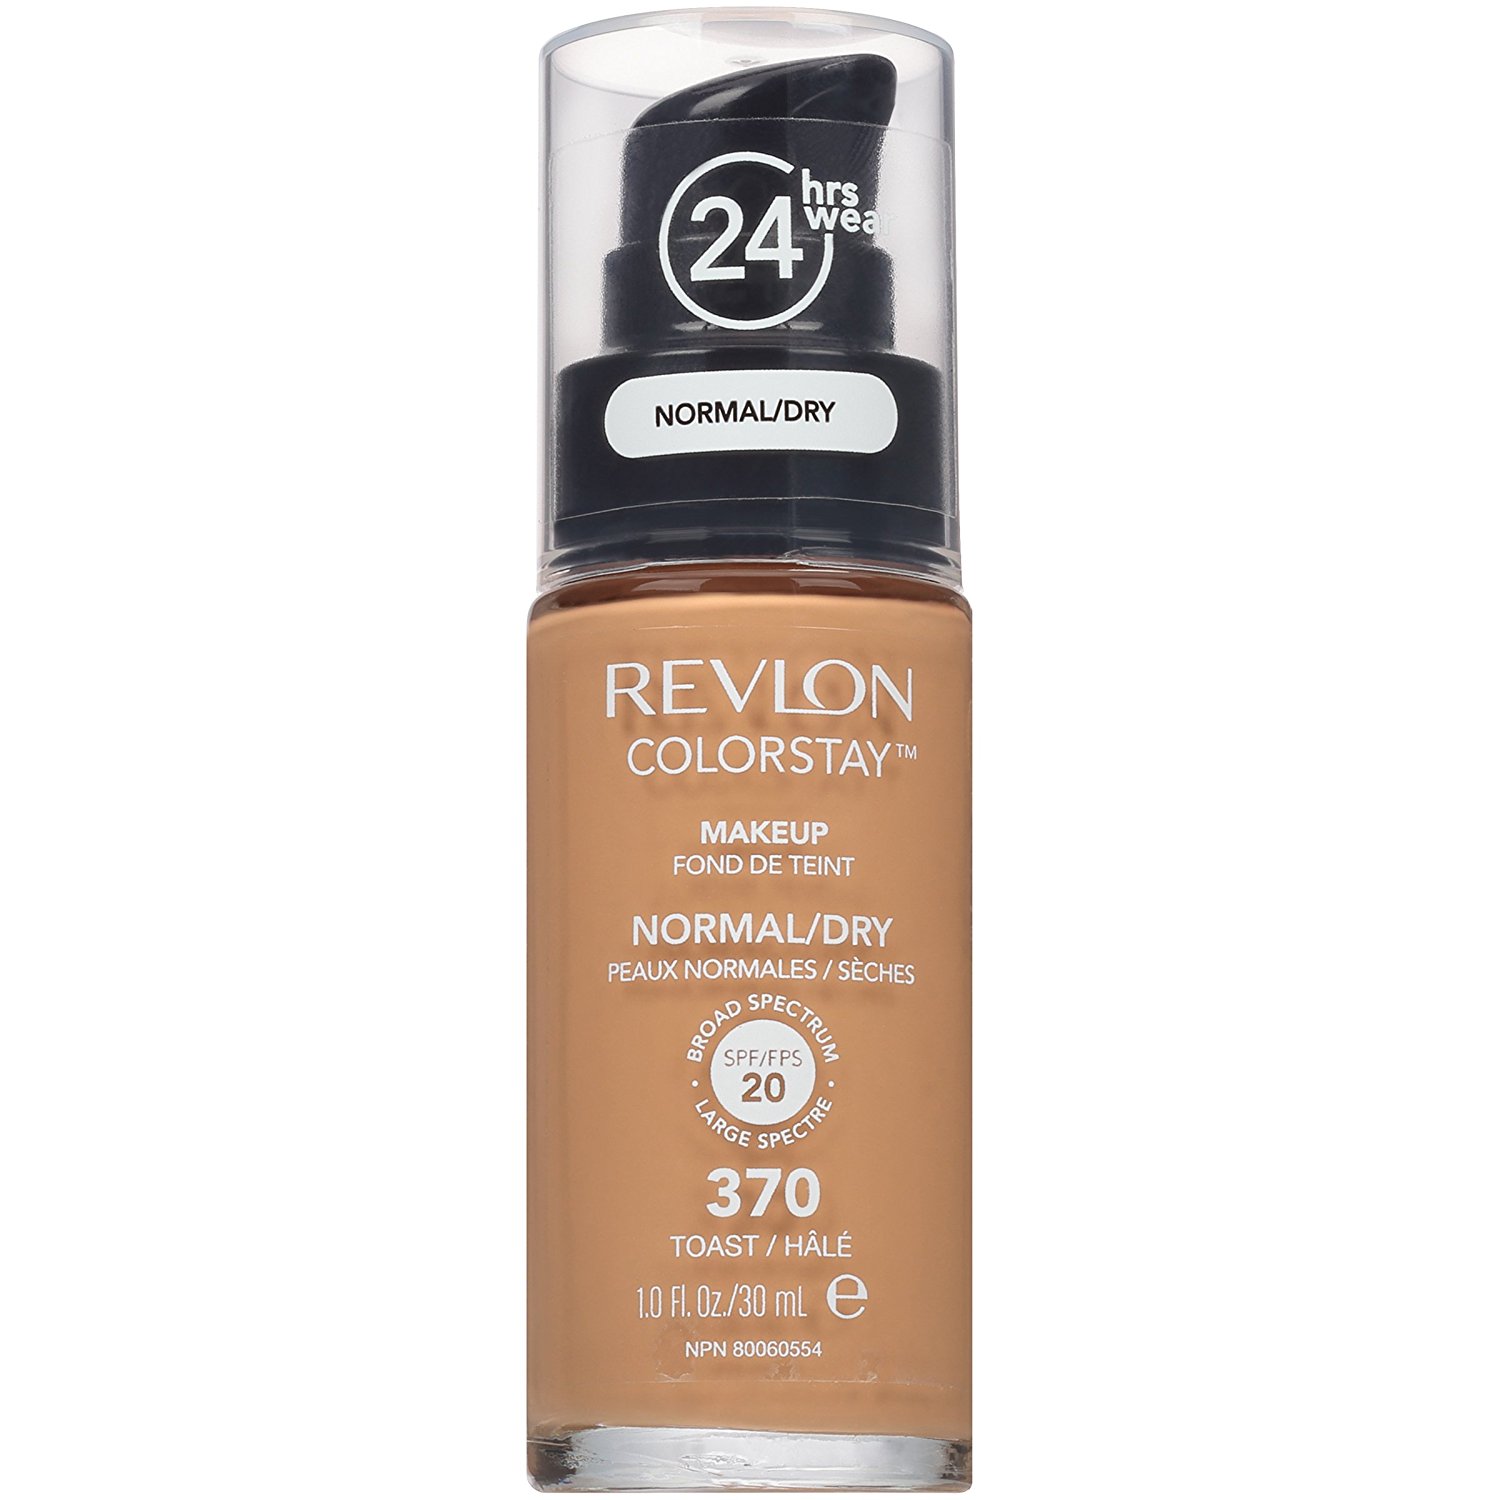 Revlon Colorstay Softflex Norm/Dry With Pump 370 poza